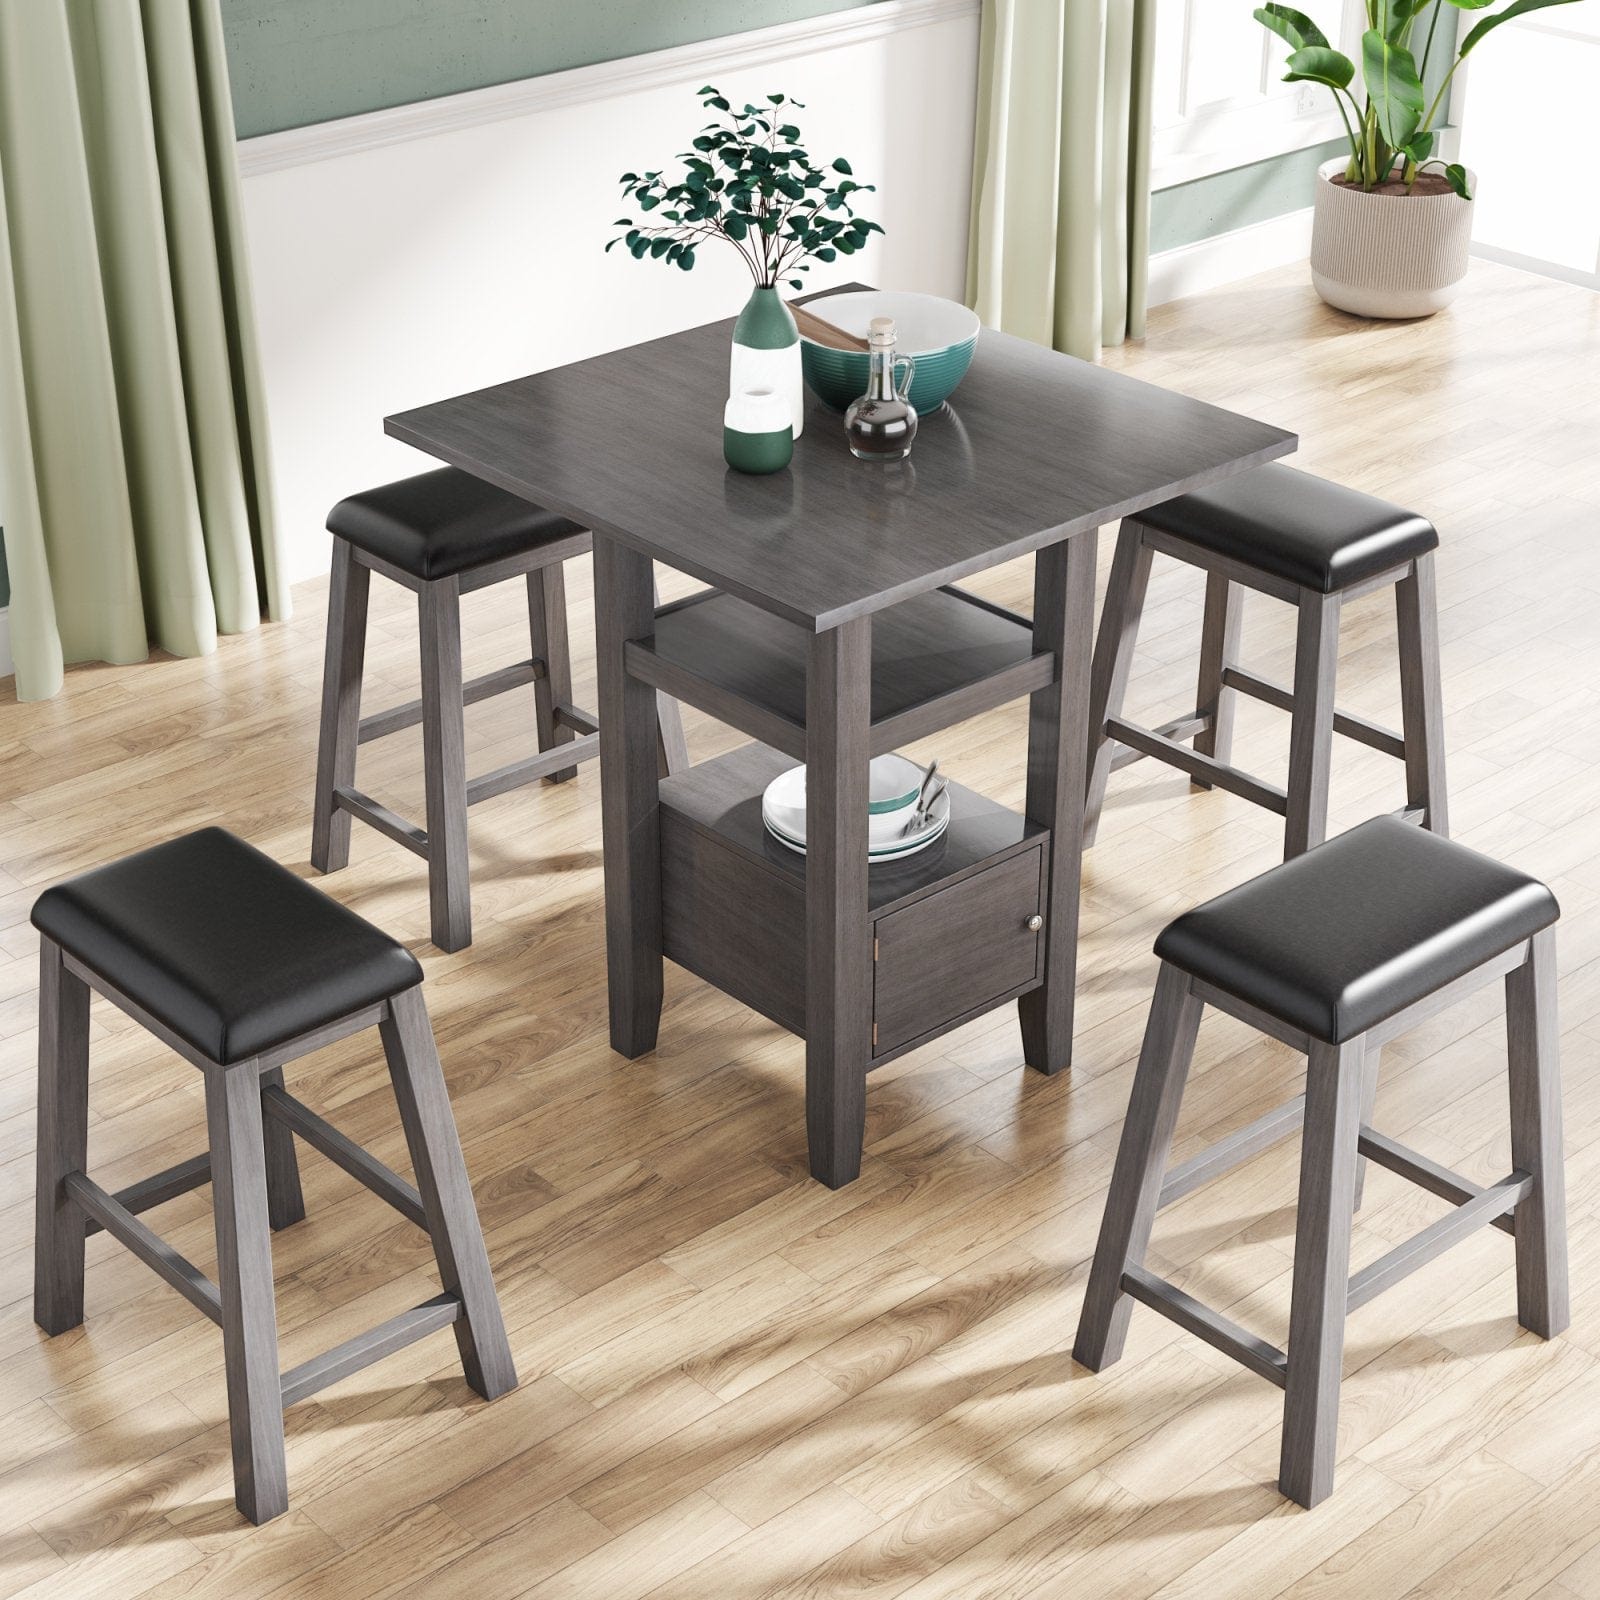 5 Pieces Counter Height Wood Kitchen Dining Table Set with 4 Upholstered Stools with Storage Cupboard and Shelf for Small Places, Gray